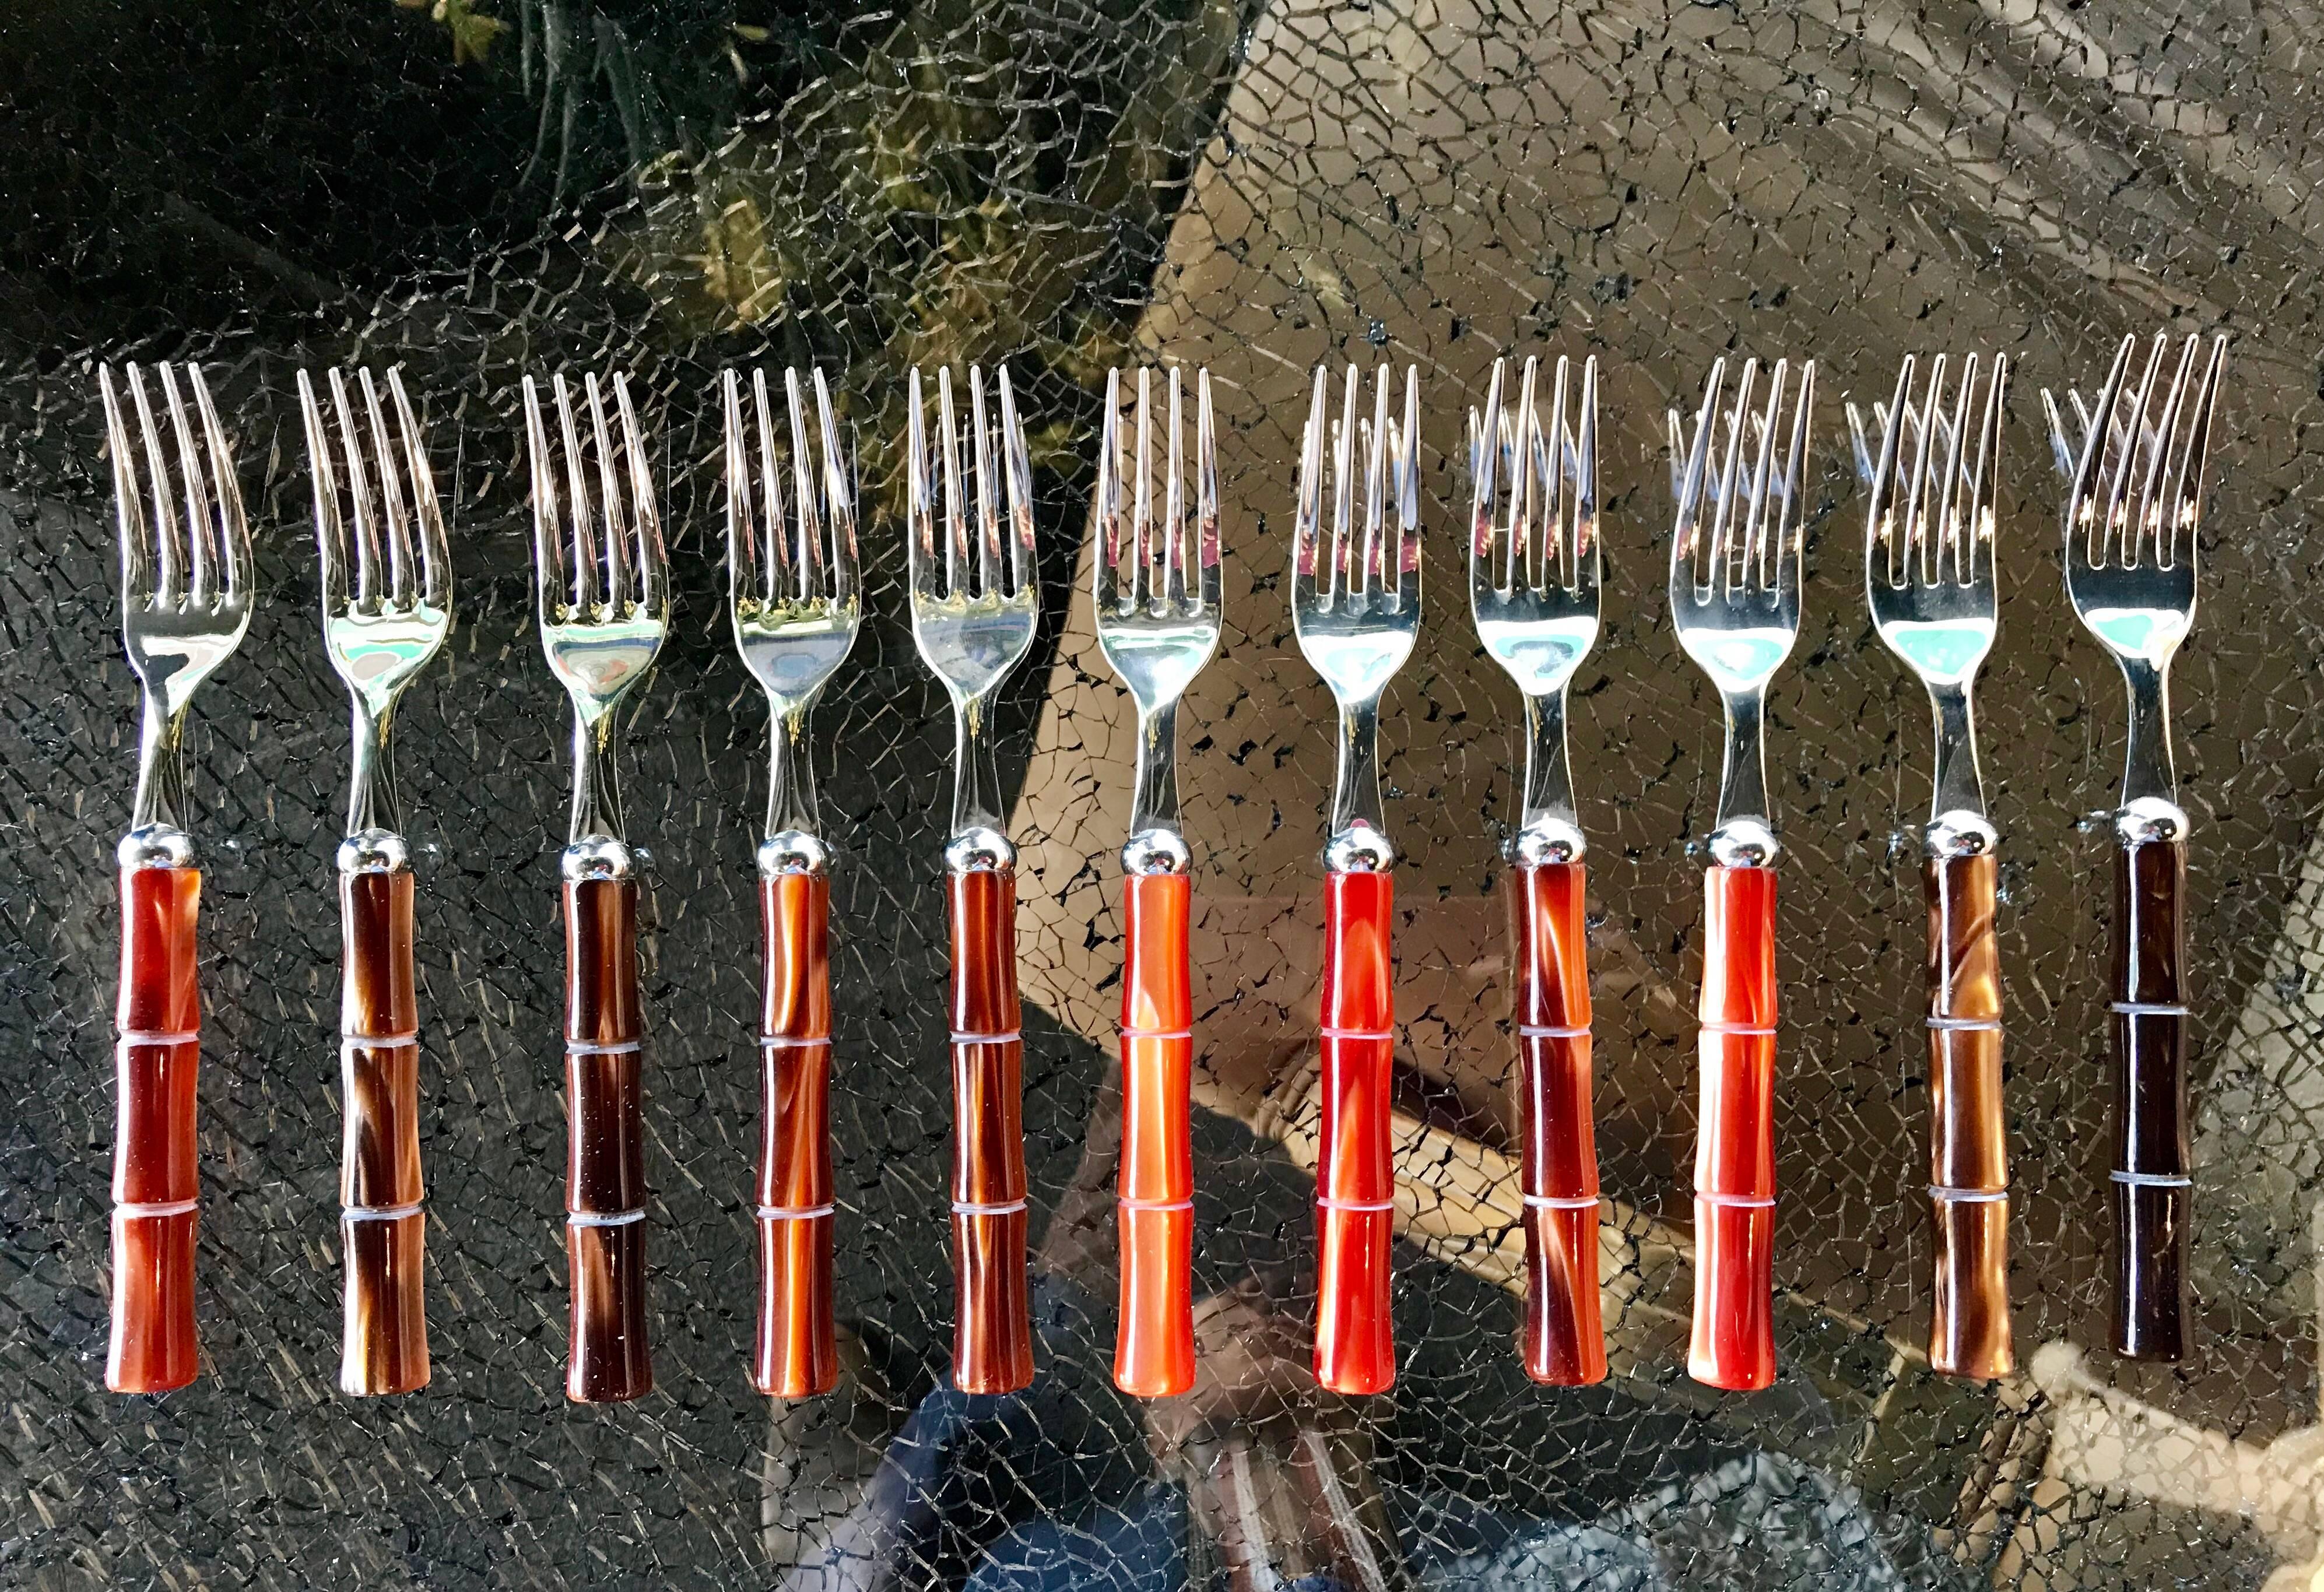 A gorgeous set of flatware made in Italy of 18/10 stainless. The acrylic (Lucite) handels are done in bamboo style in an amazing mother-of-pearl look in colors or browns and russet. No 2 pieces are exactly alike. Purchased for a very upscale